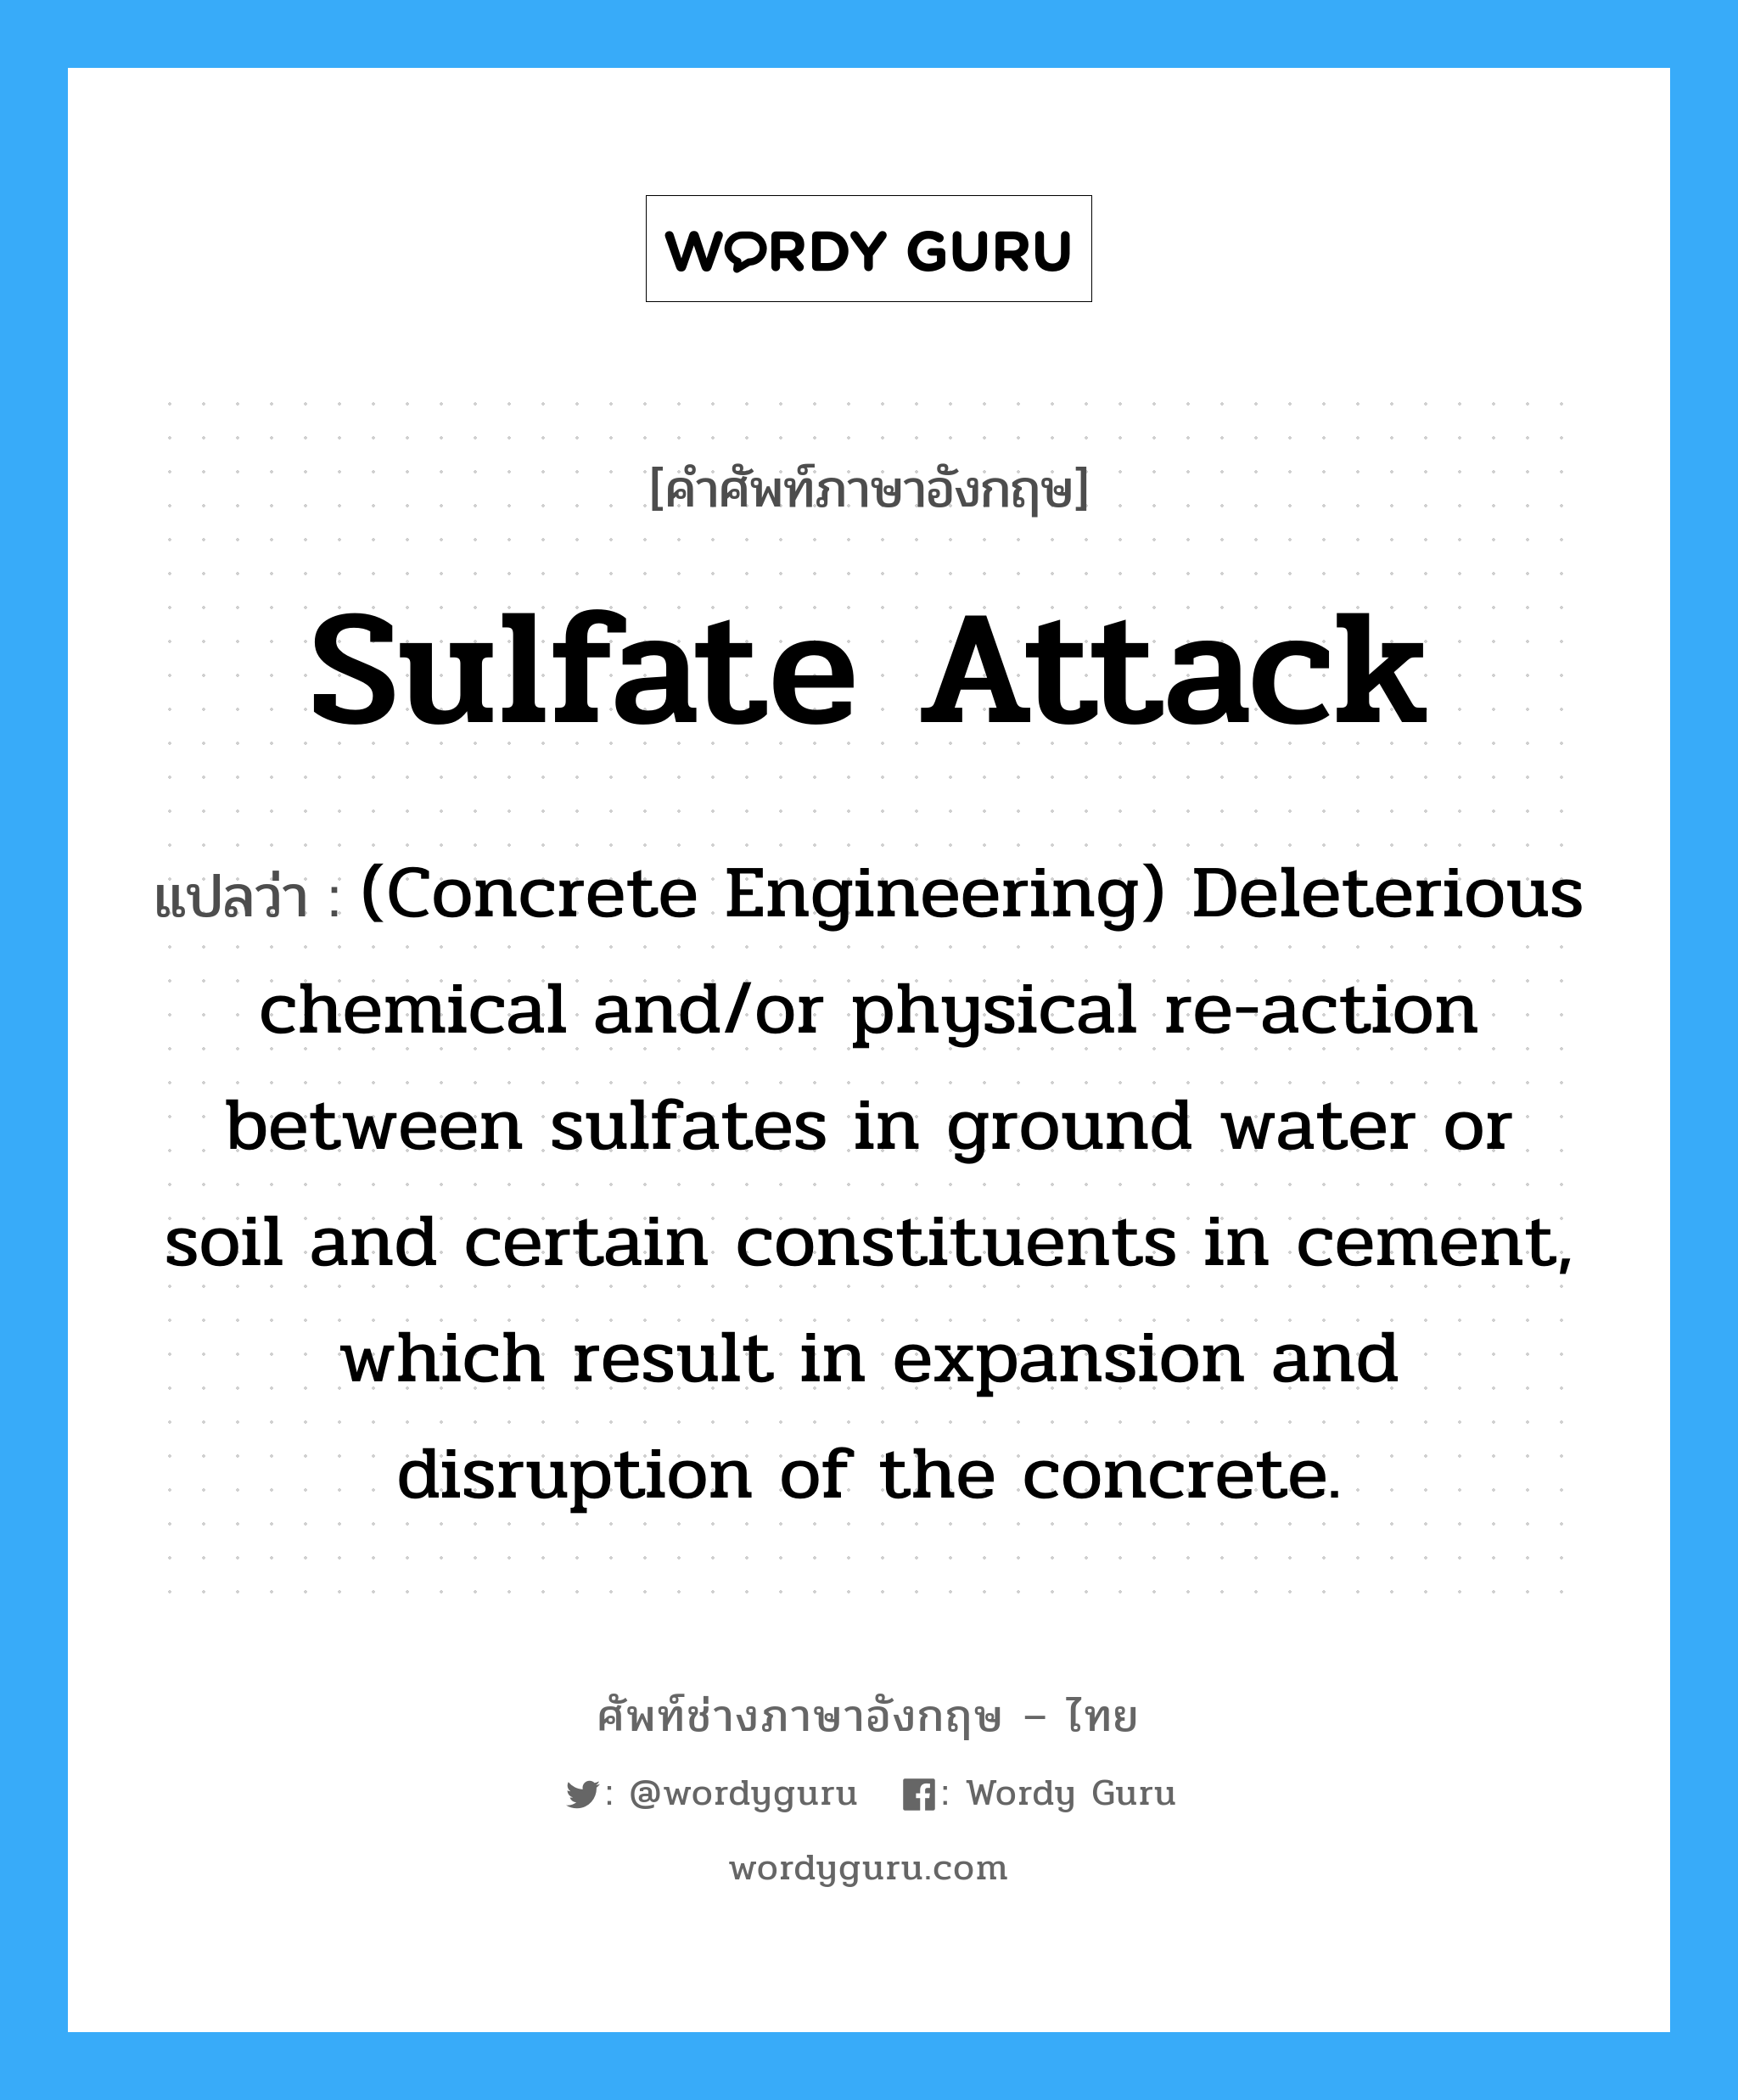 Sulfate Attack แปลว่า?, คำศัพท์ช่างภาษาอังกฤษ - ไทย Sulfate Attack คำศัพท์ภาษาอังกฤษ Sulfate Attack แปลว่า (Concrete Engineering) Deleterious chemical and/or physical re-action between sulfates in ground water or soil and certain constituents in cement, which result in expansion and disruption of the concrete.